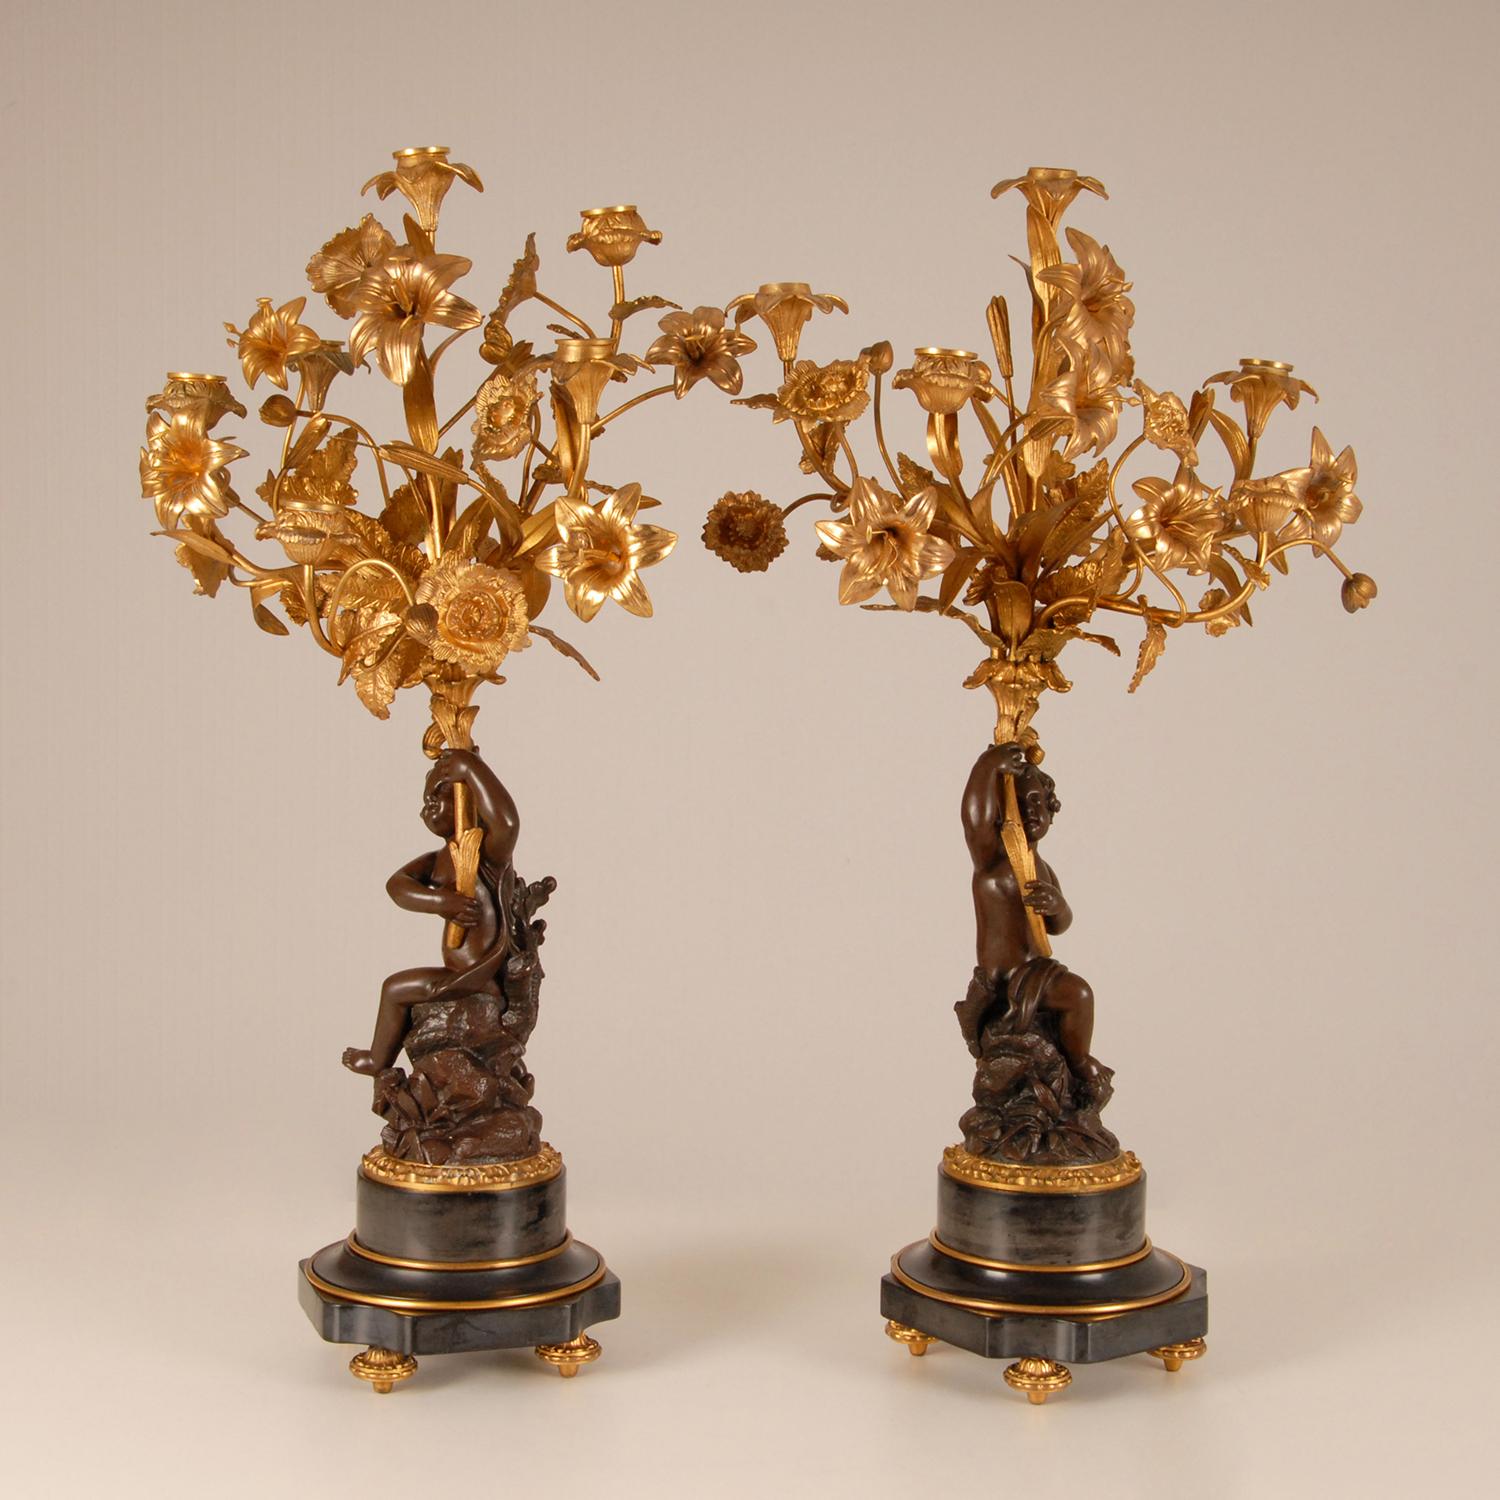 Napoleon III Victorian French Gold Gilded Bronze Putto and Flowers Candelabras on Marble Base For Sale